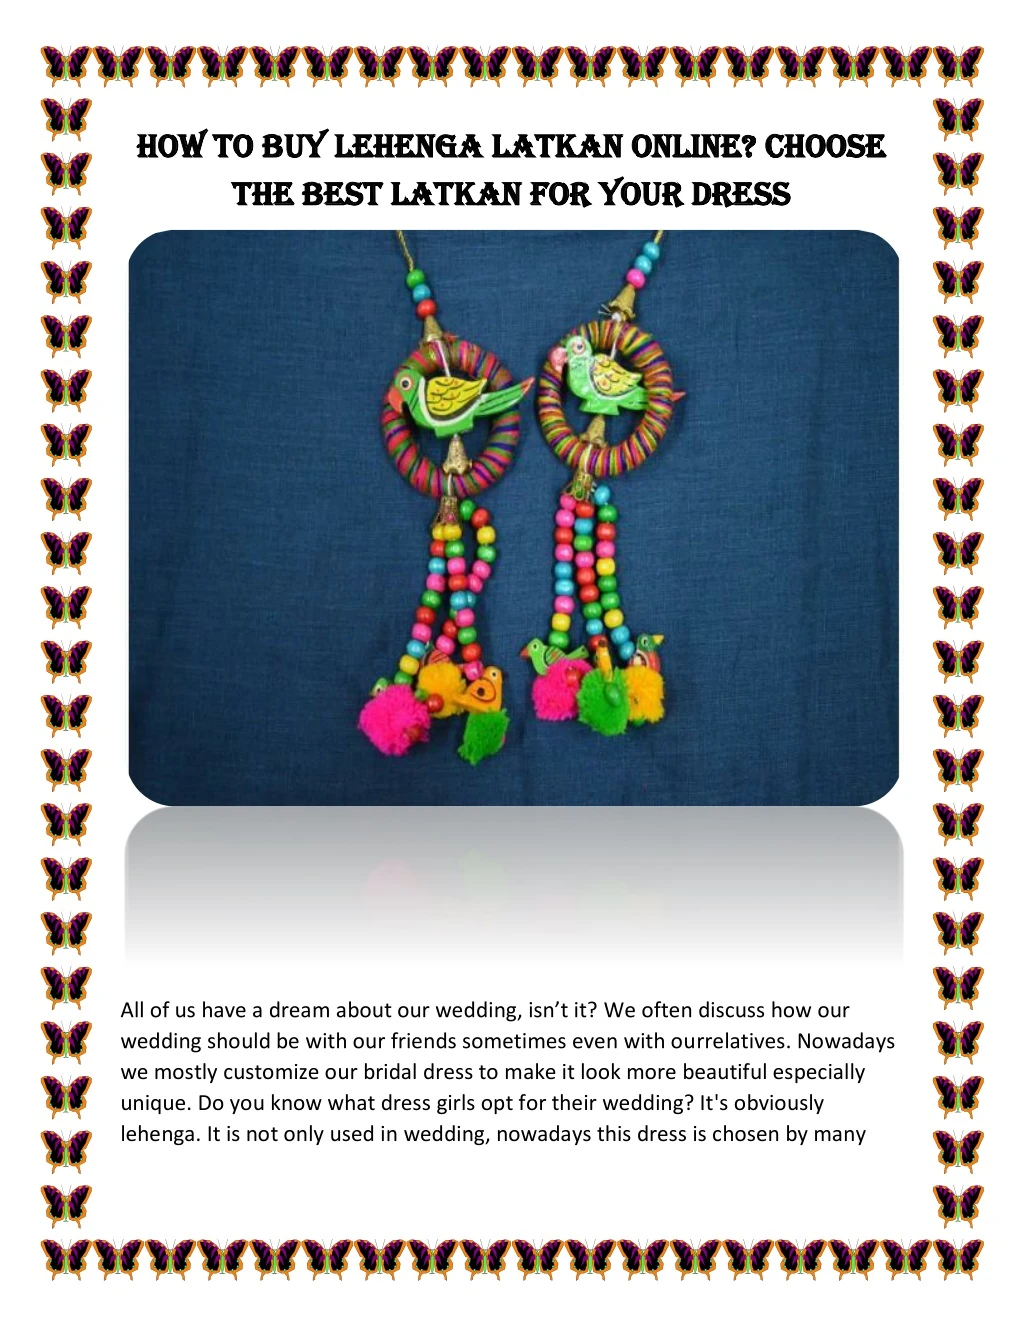 how to how to buy the best latkan for your dress